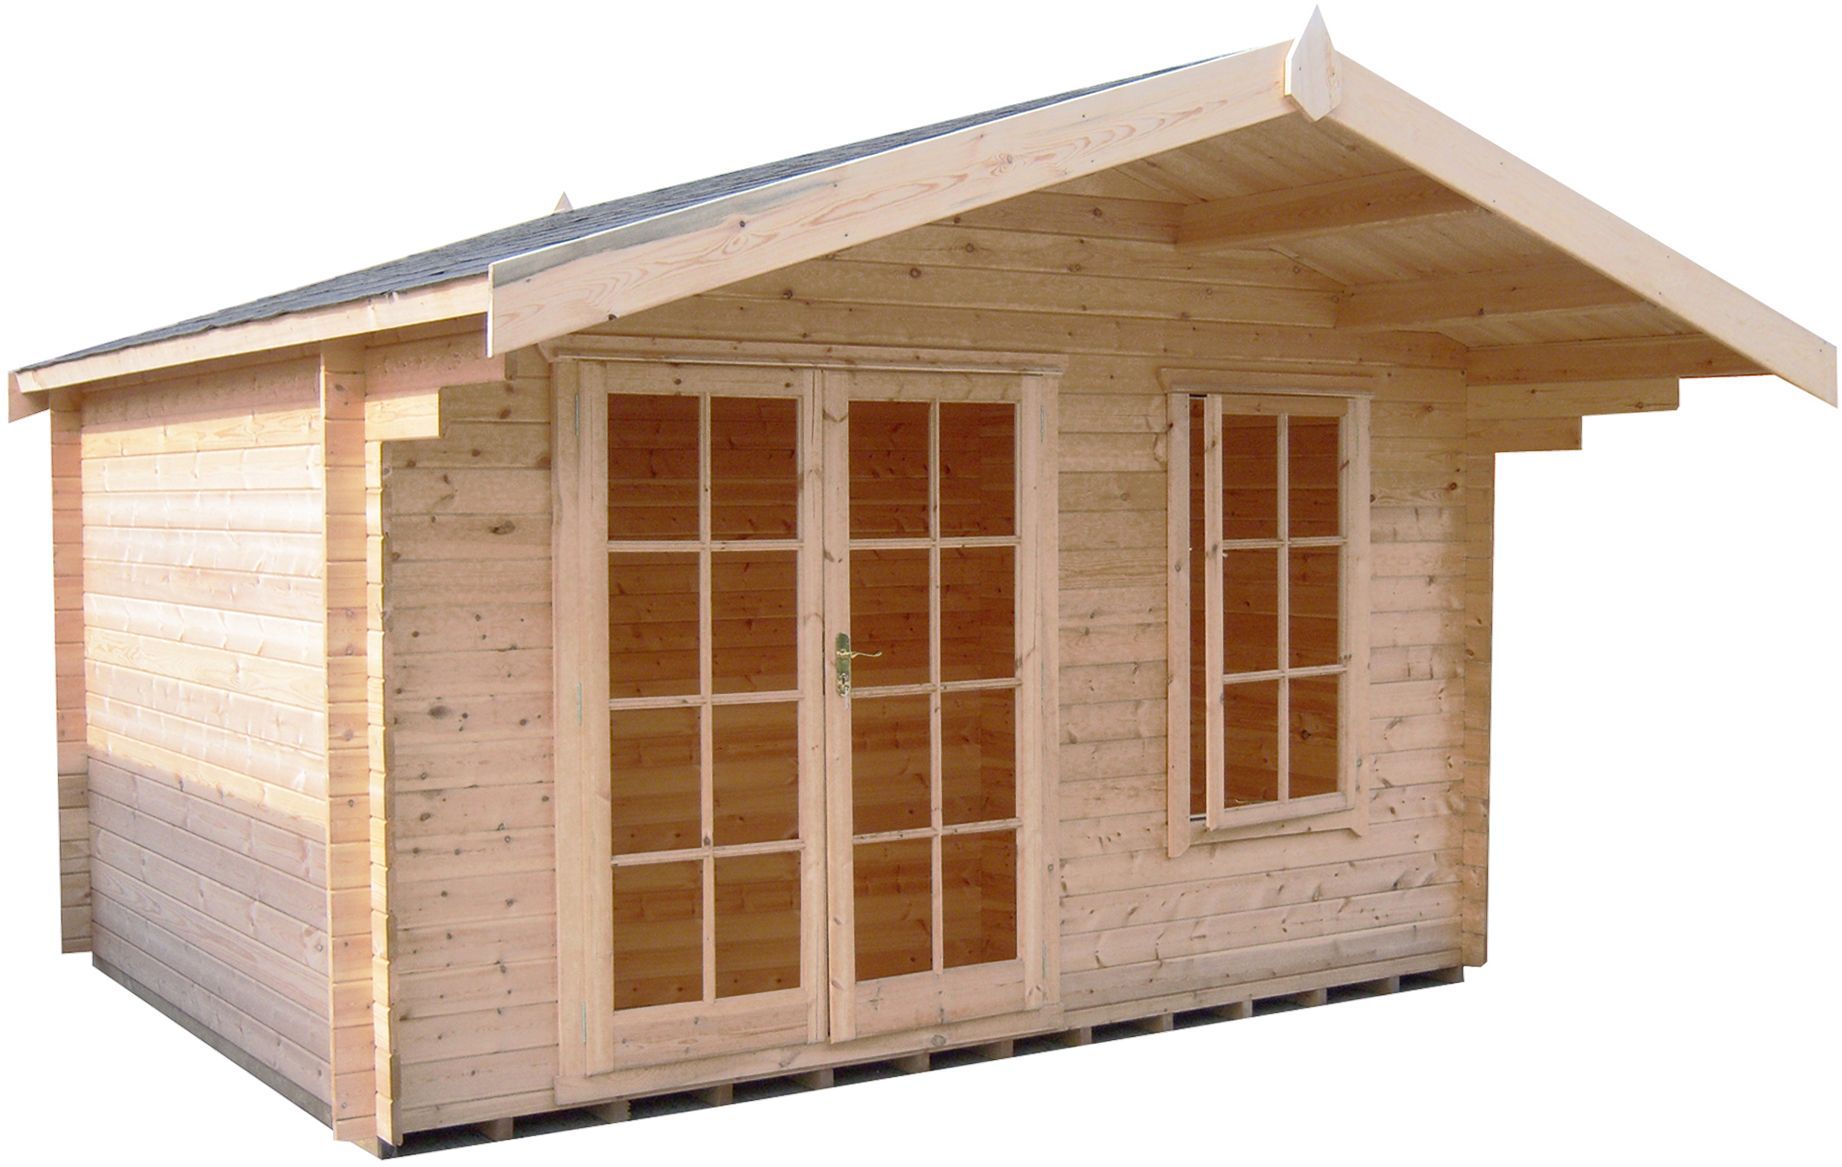 Shire Cannock 12x10 Apex Tongue & groove Wooden Cabin